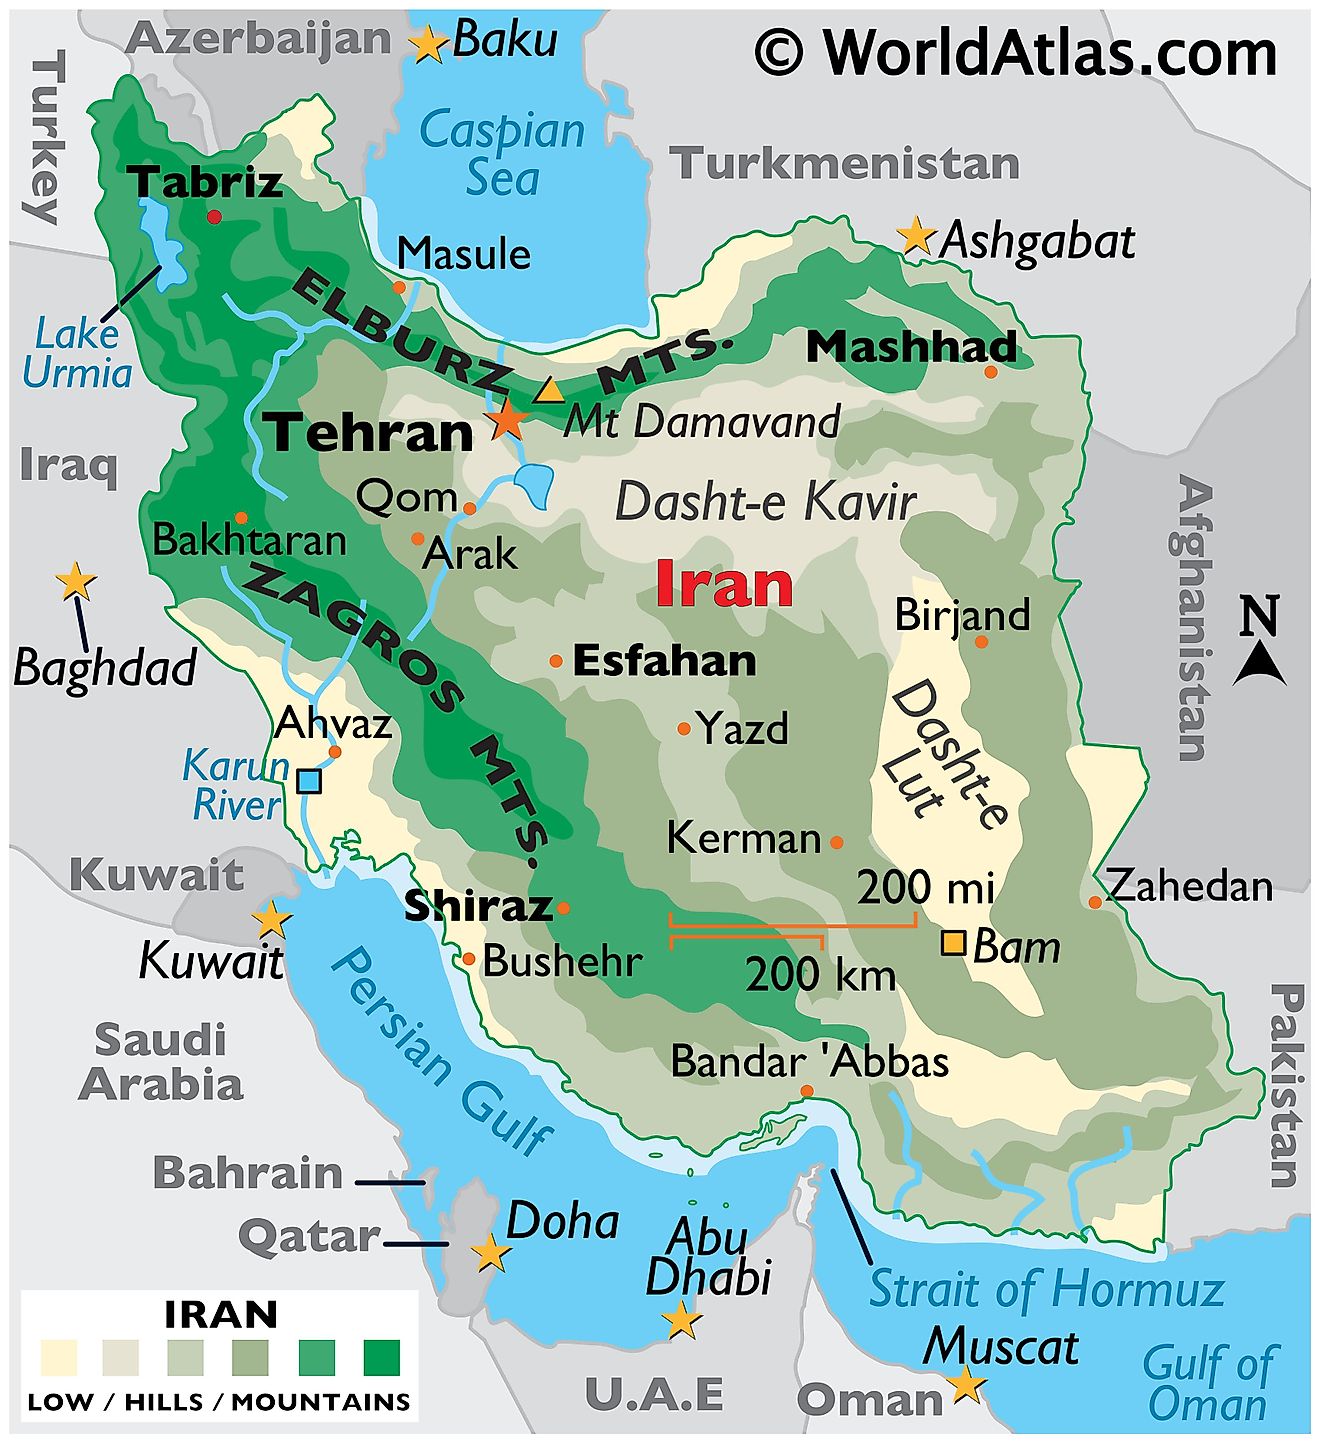 Physical Map of Iran showing state boundaries, relief, major rivers, important cities, extreme points, mountain ranges, etc.